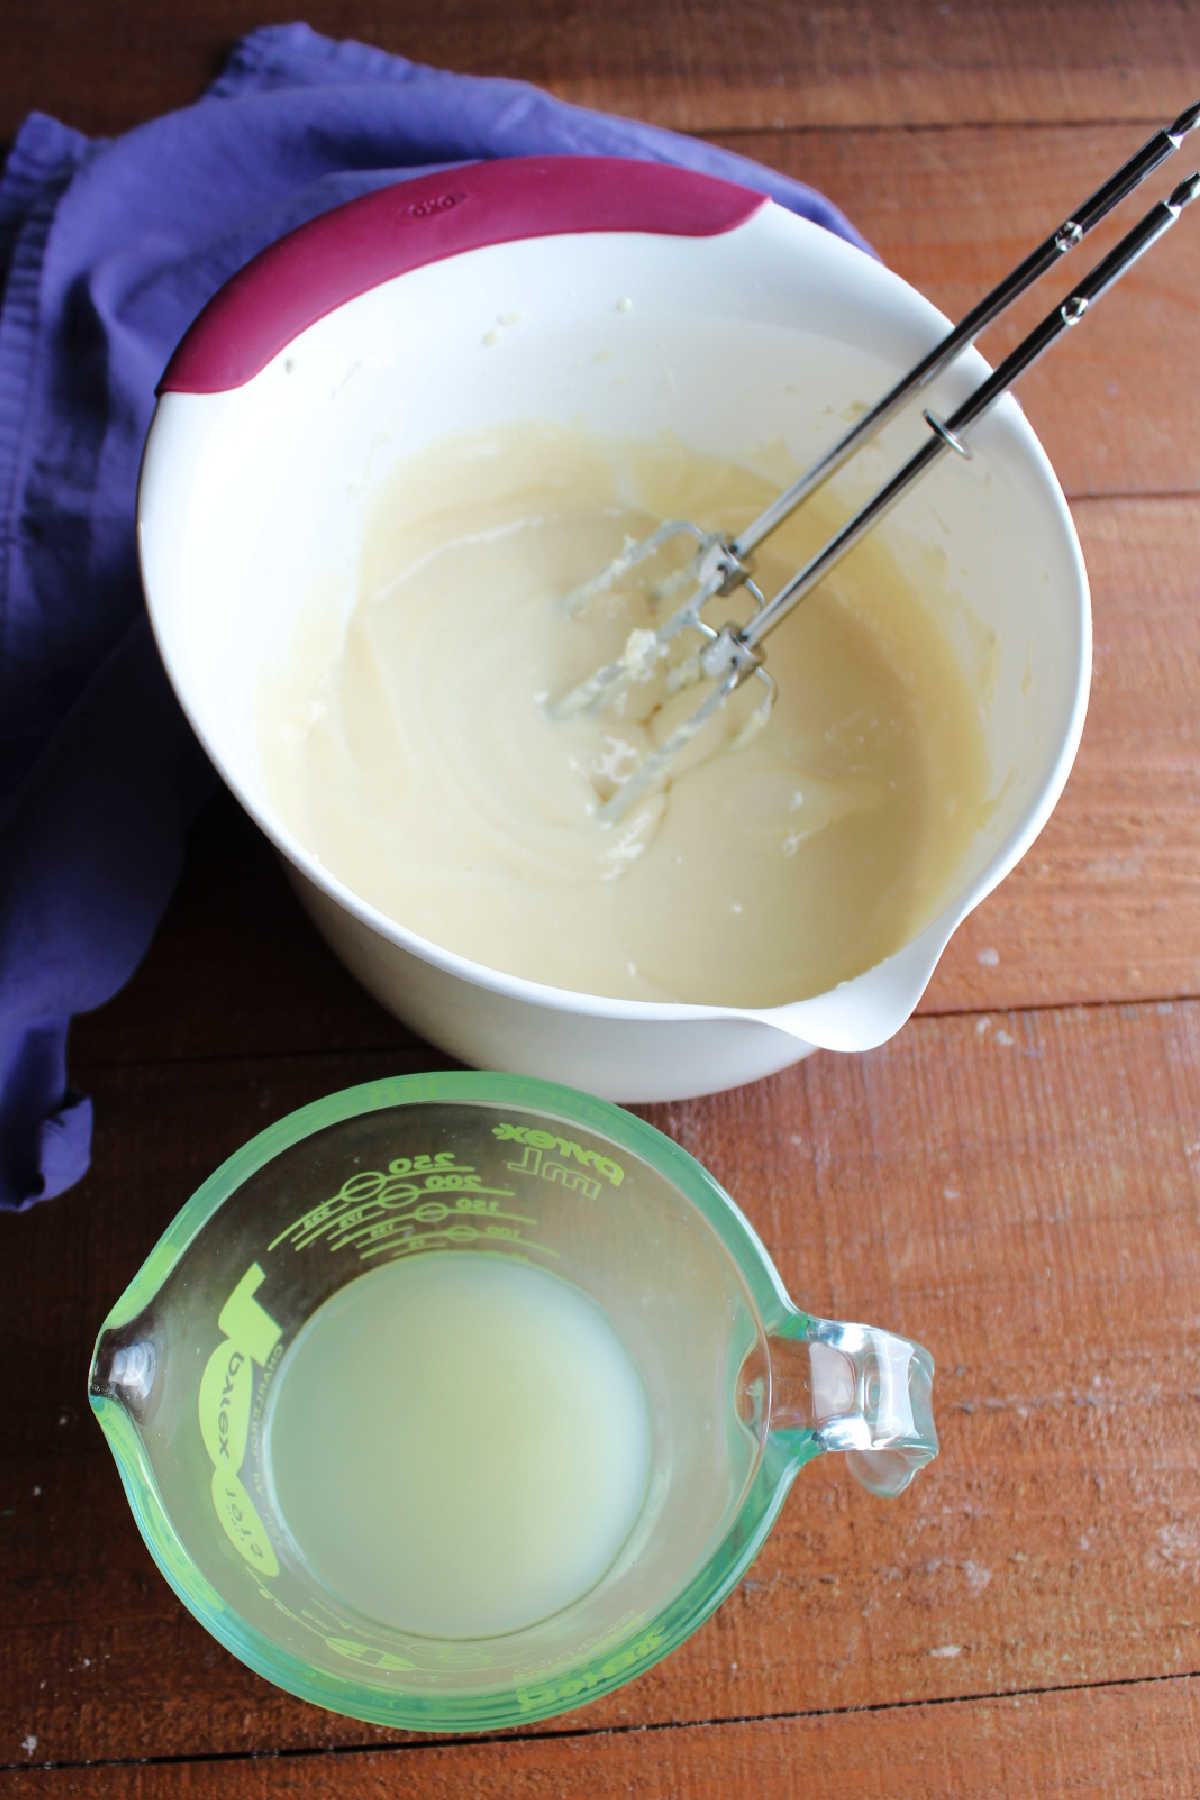 Mixing bowl containing smooth cream cheese and condensed milk mixture next to a measuring cup with lemon juice inside.